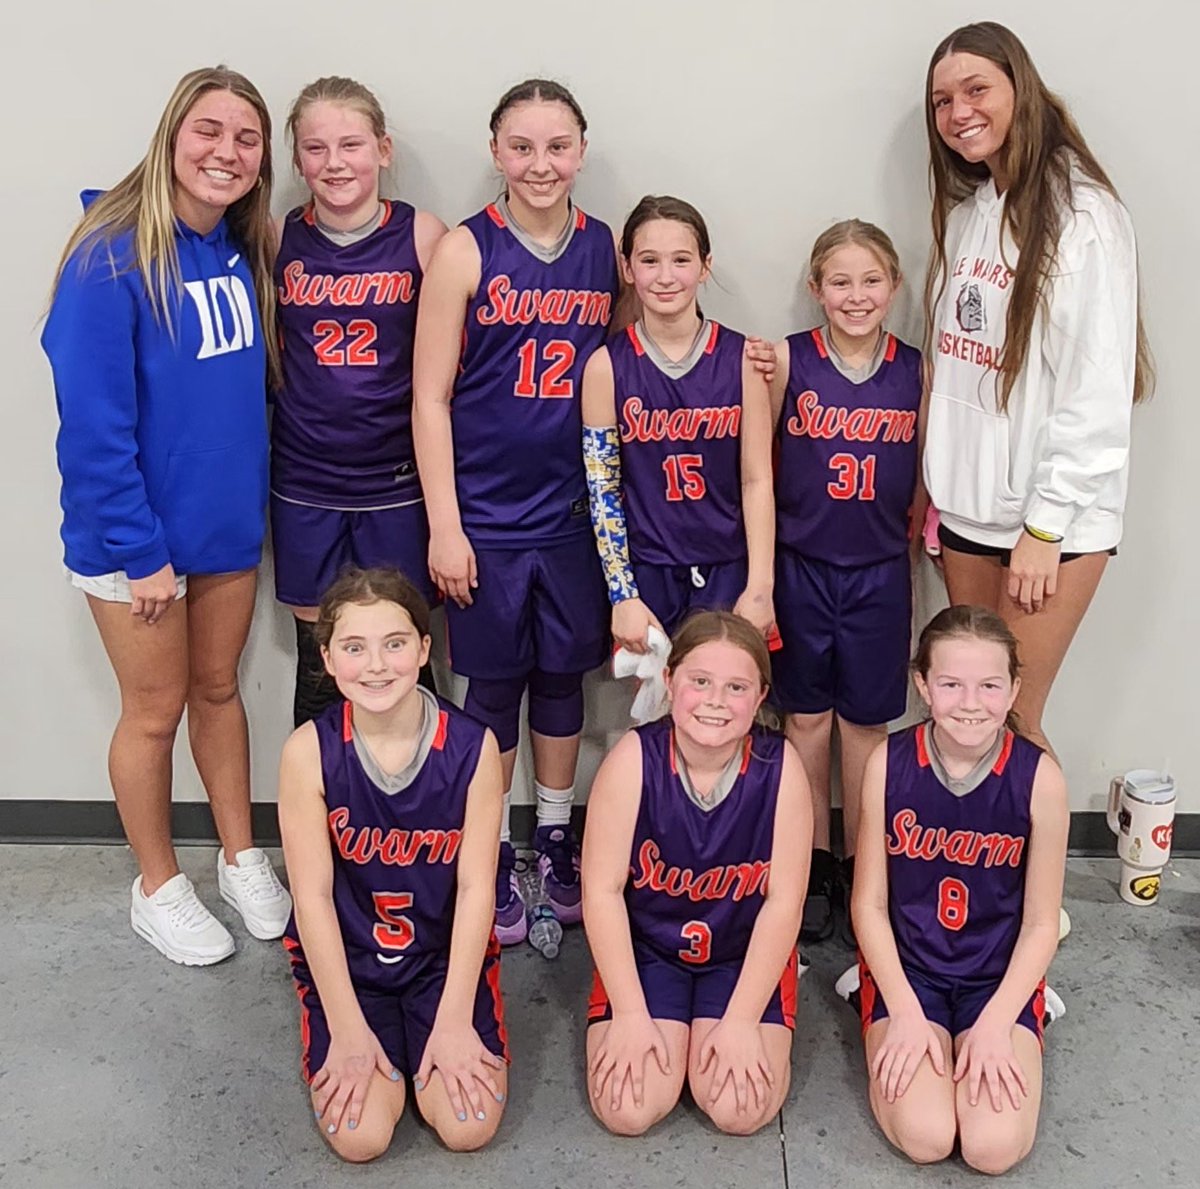 Great weekend of hoops!! SWARM teams went 25-15 for the weekend @ElkhornAttack Midwest Regional Hoops tournament. 🏆6th Swarm-Kastning 🏆8th Swarm-Semple 🏆4th Swarm-Brown/Skov Great winter season🔥worked hard. Got better. Looking forward to summer ball💜🏀 @theother_coachk